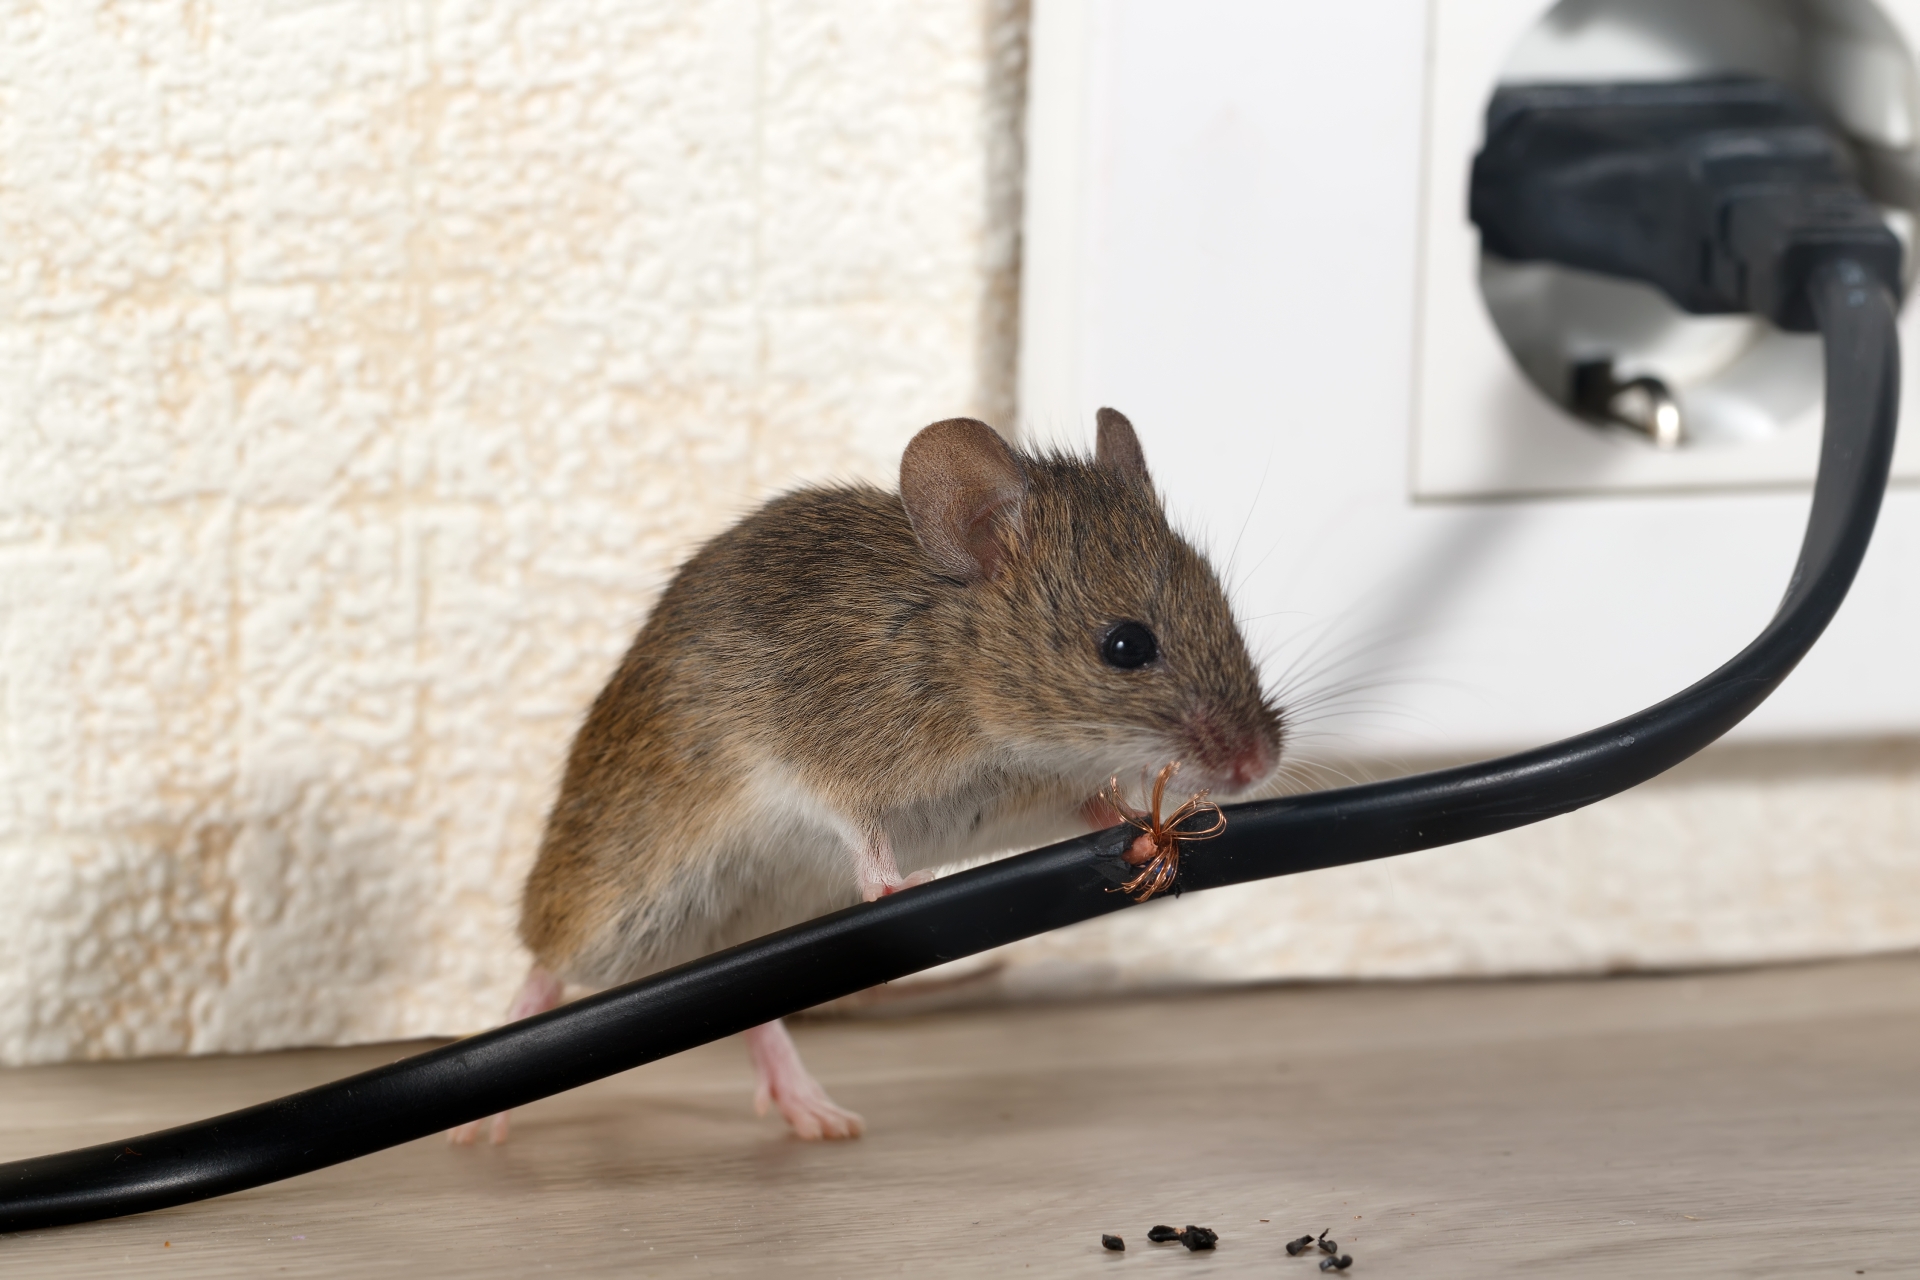 Mice Infestation, Pest Control in Banstead, Woodmansterne, SM7. Call Now 020 8166 9746